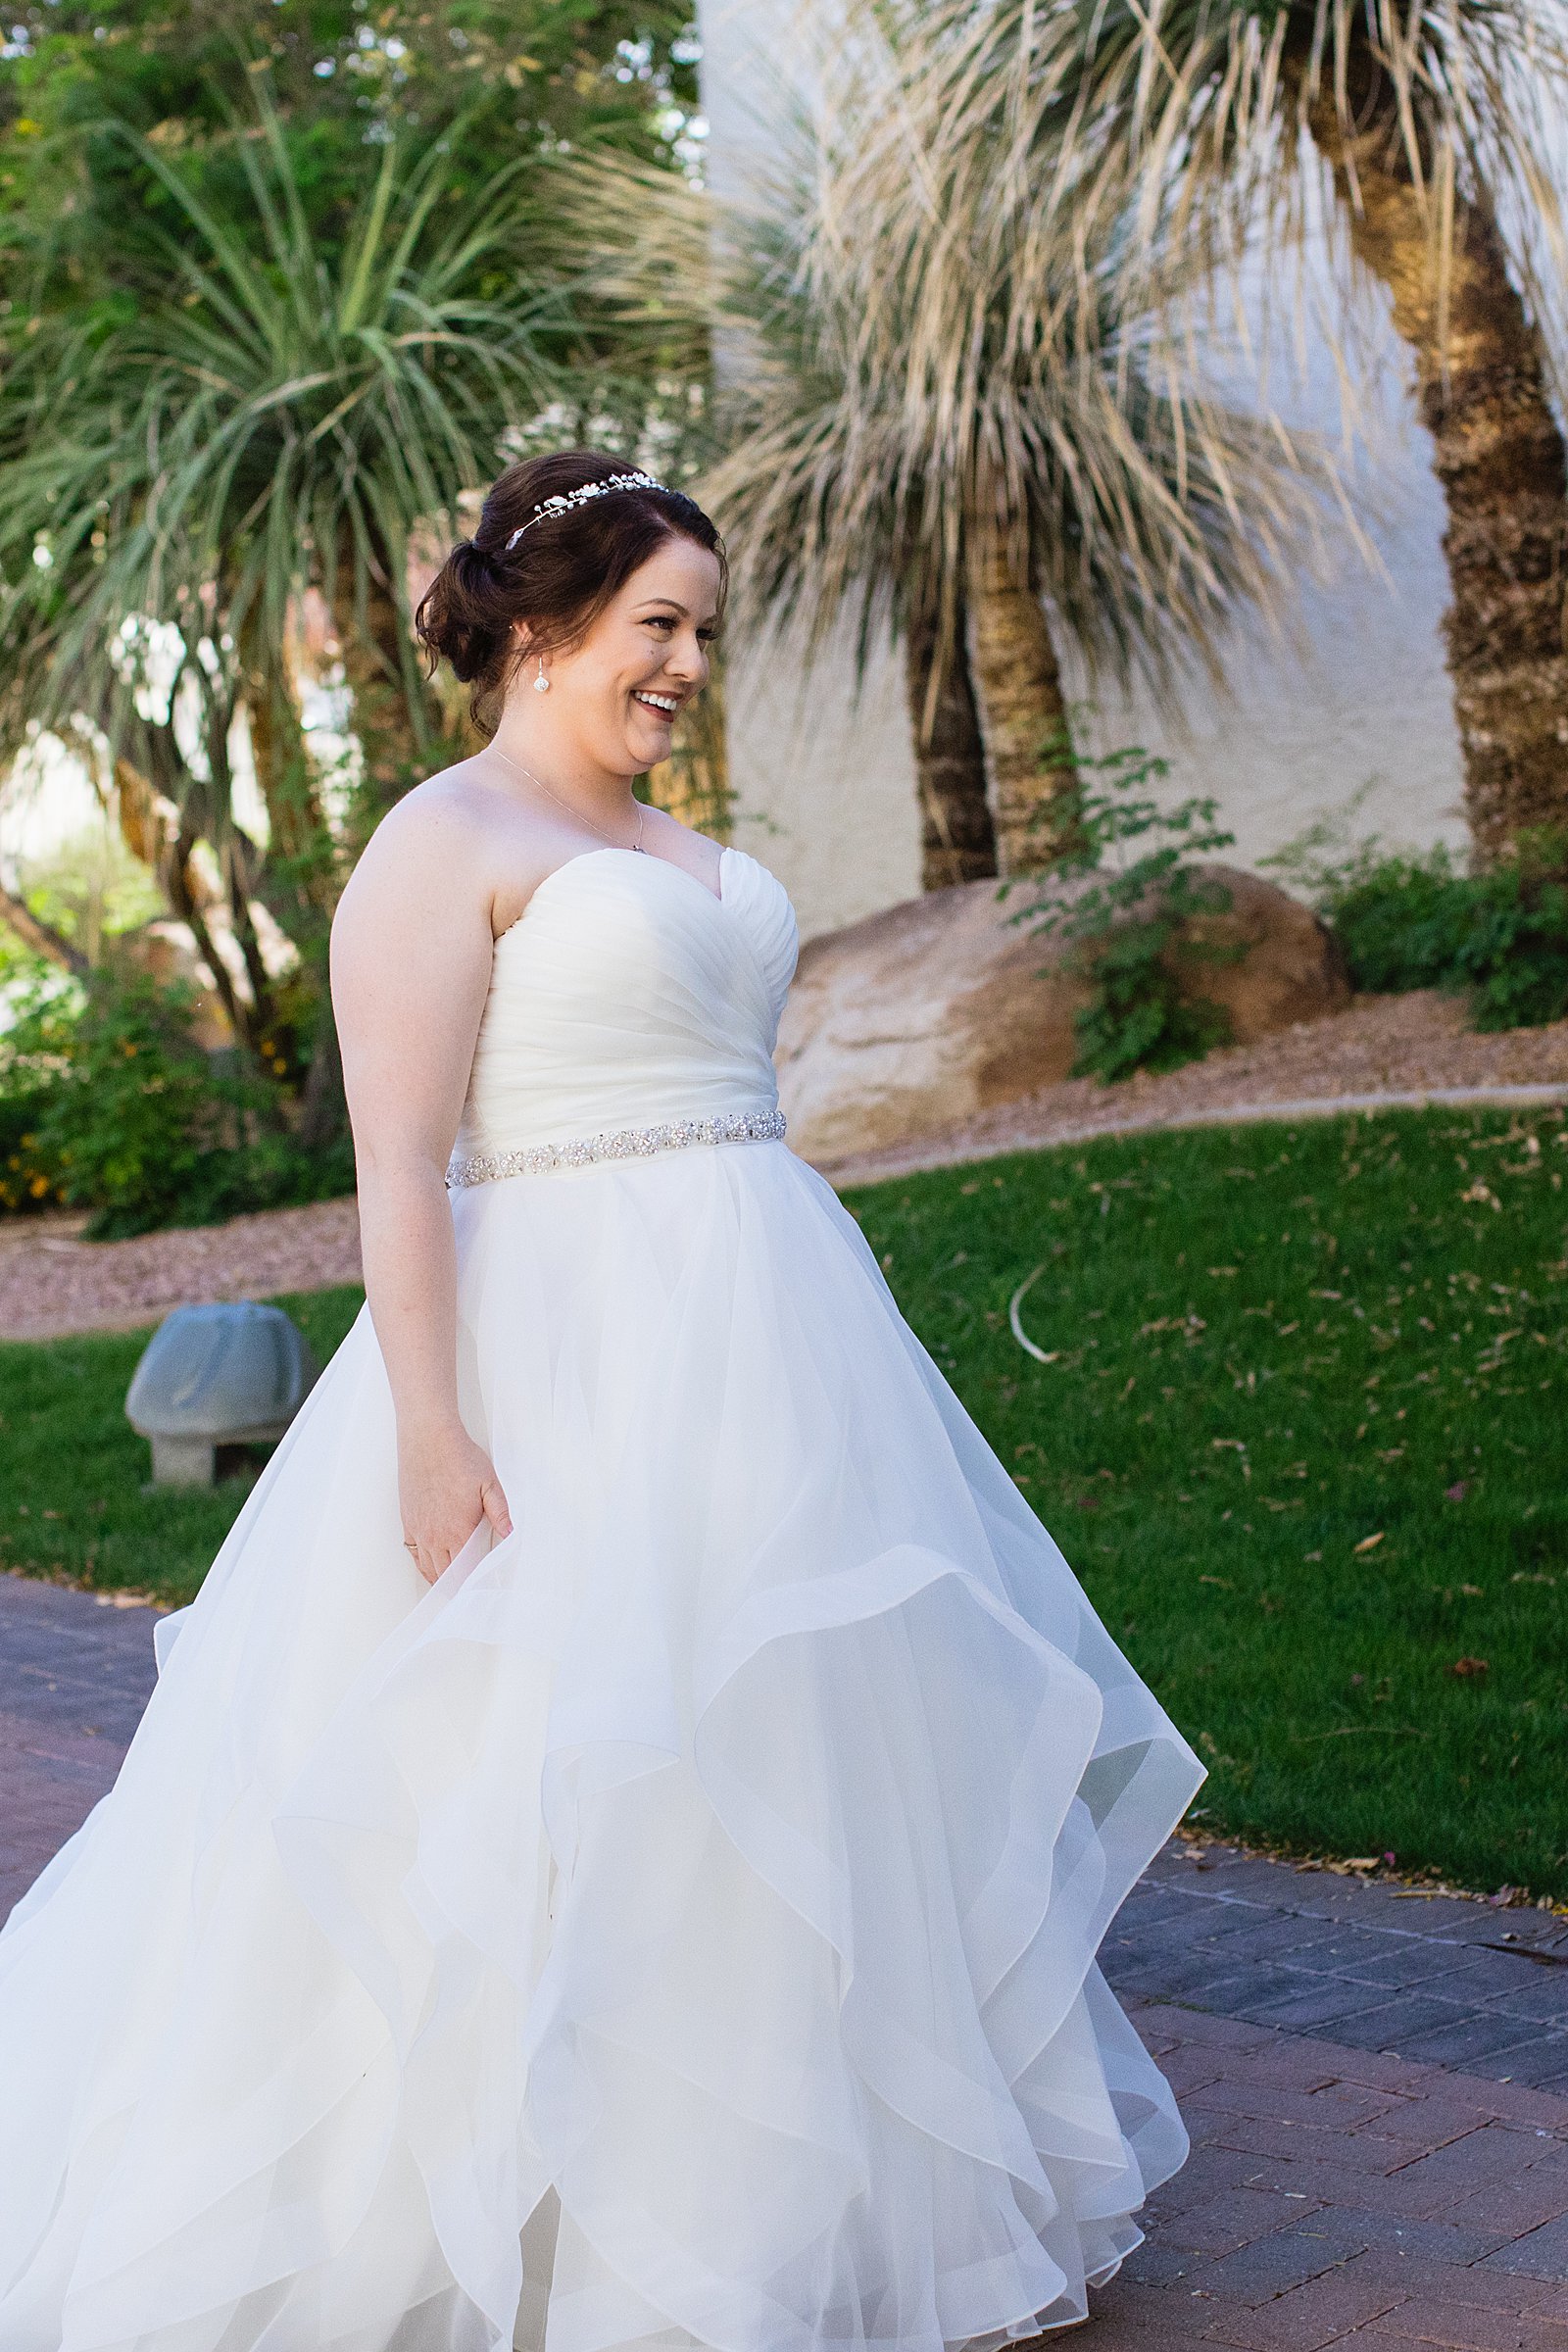 Bride and Groom's first look at Arizona Grand Resort by Phoenix wedding photographer PMA Photography.